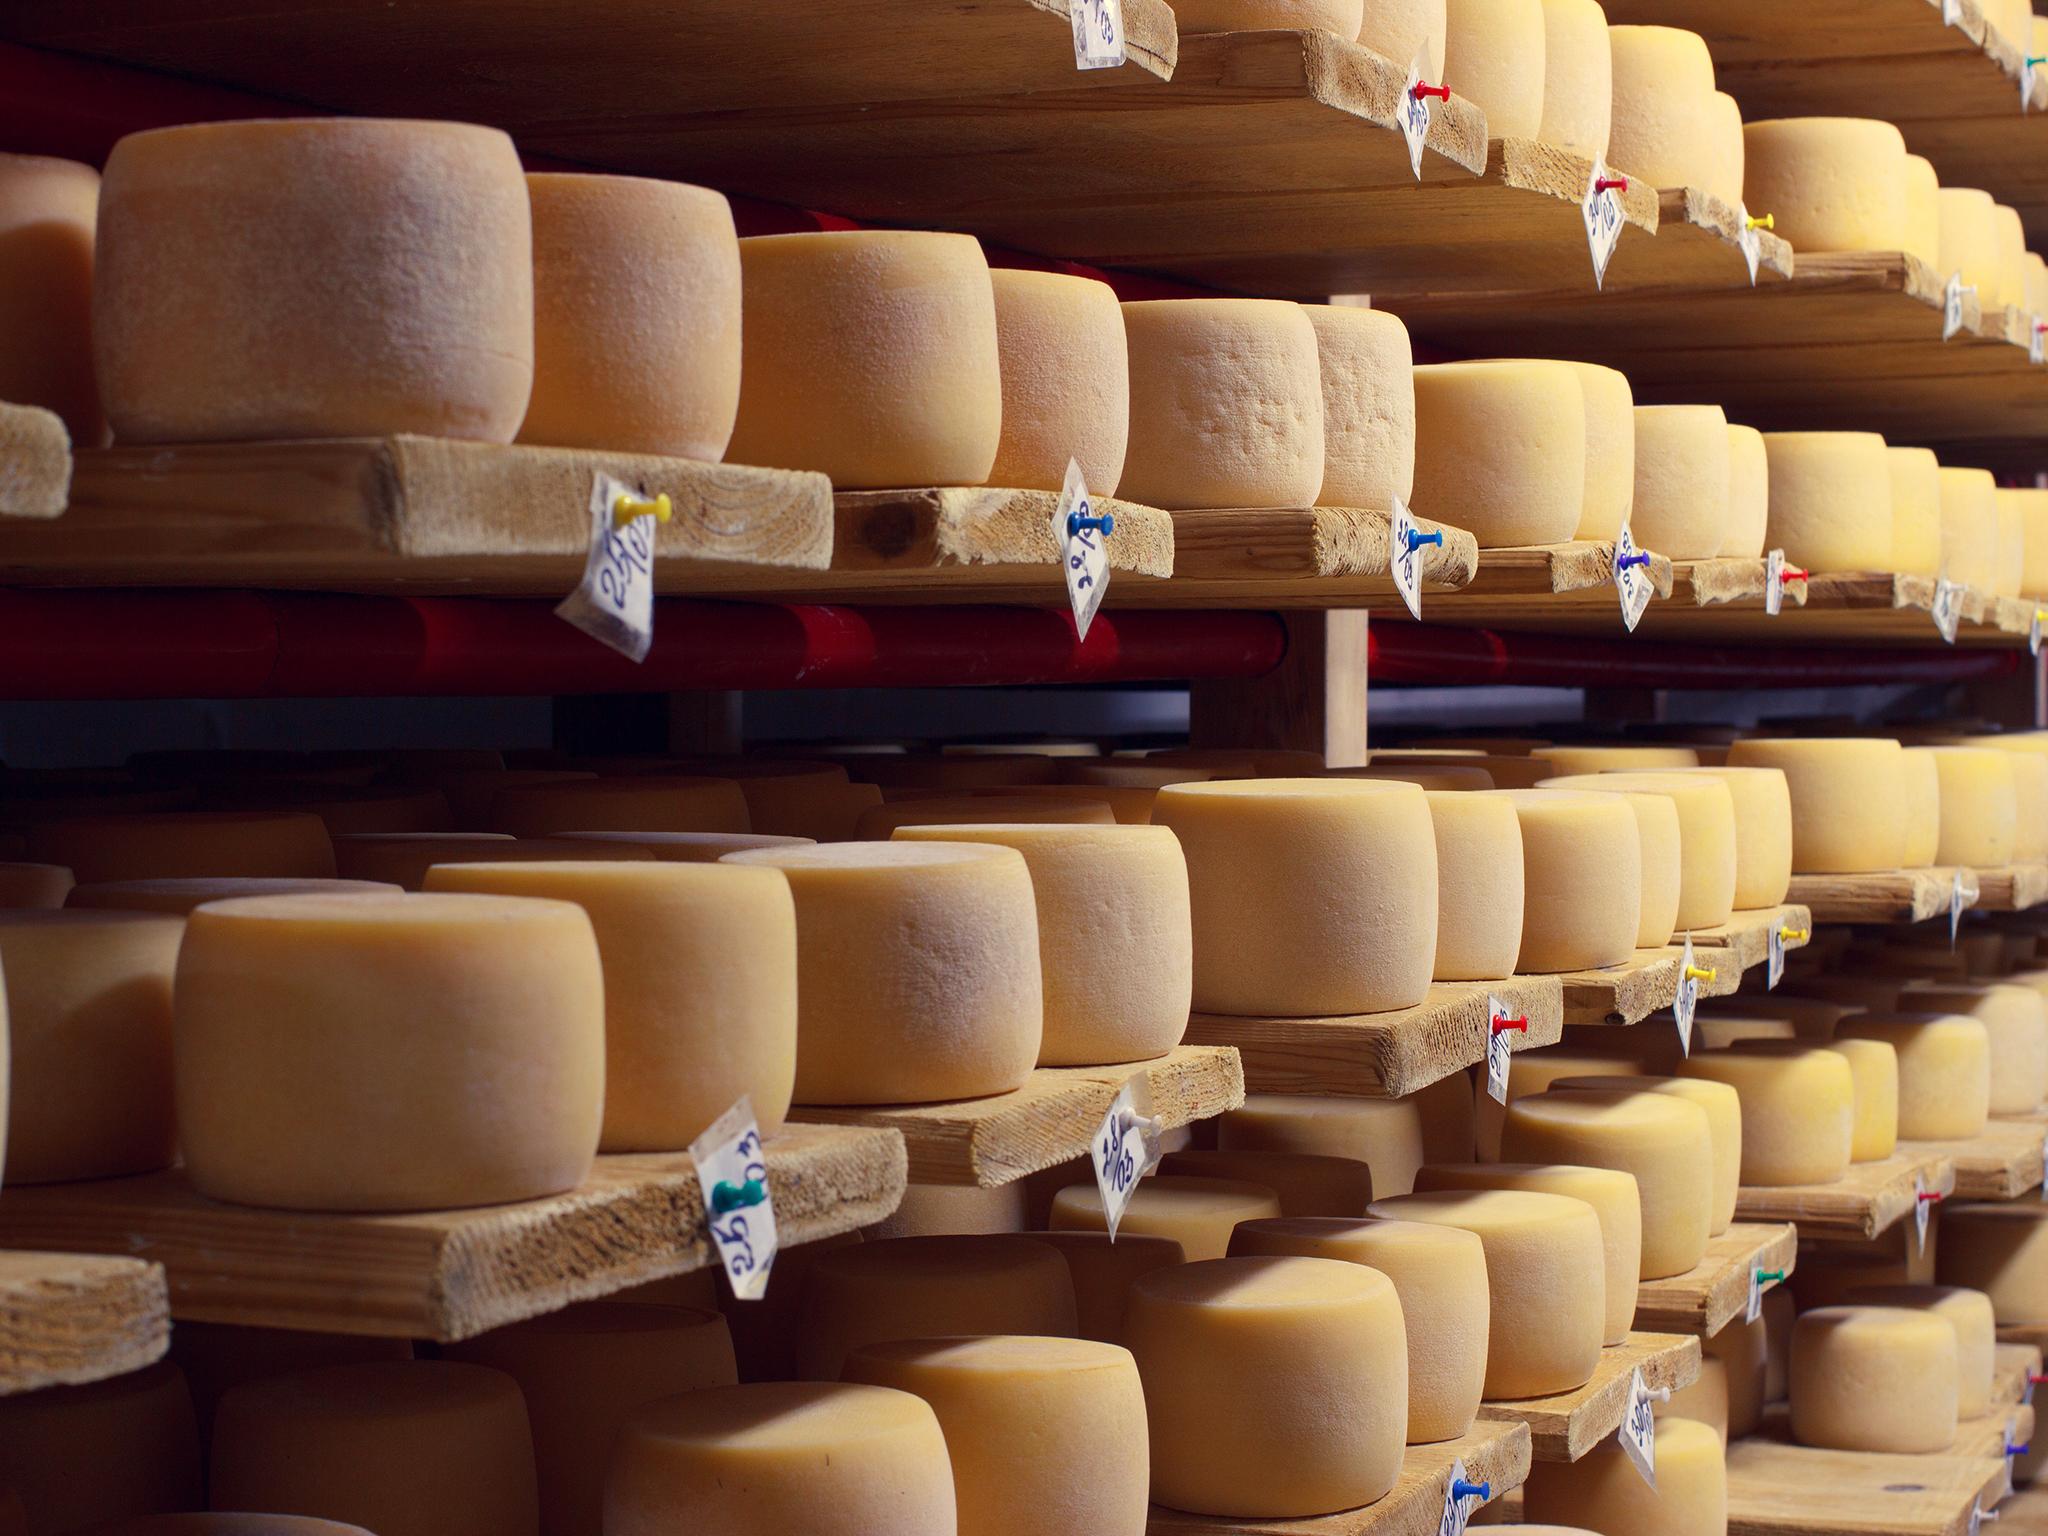 Cheese production could be affected by heat stress on dairy herds which could hit milk yields